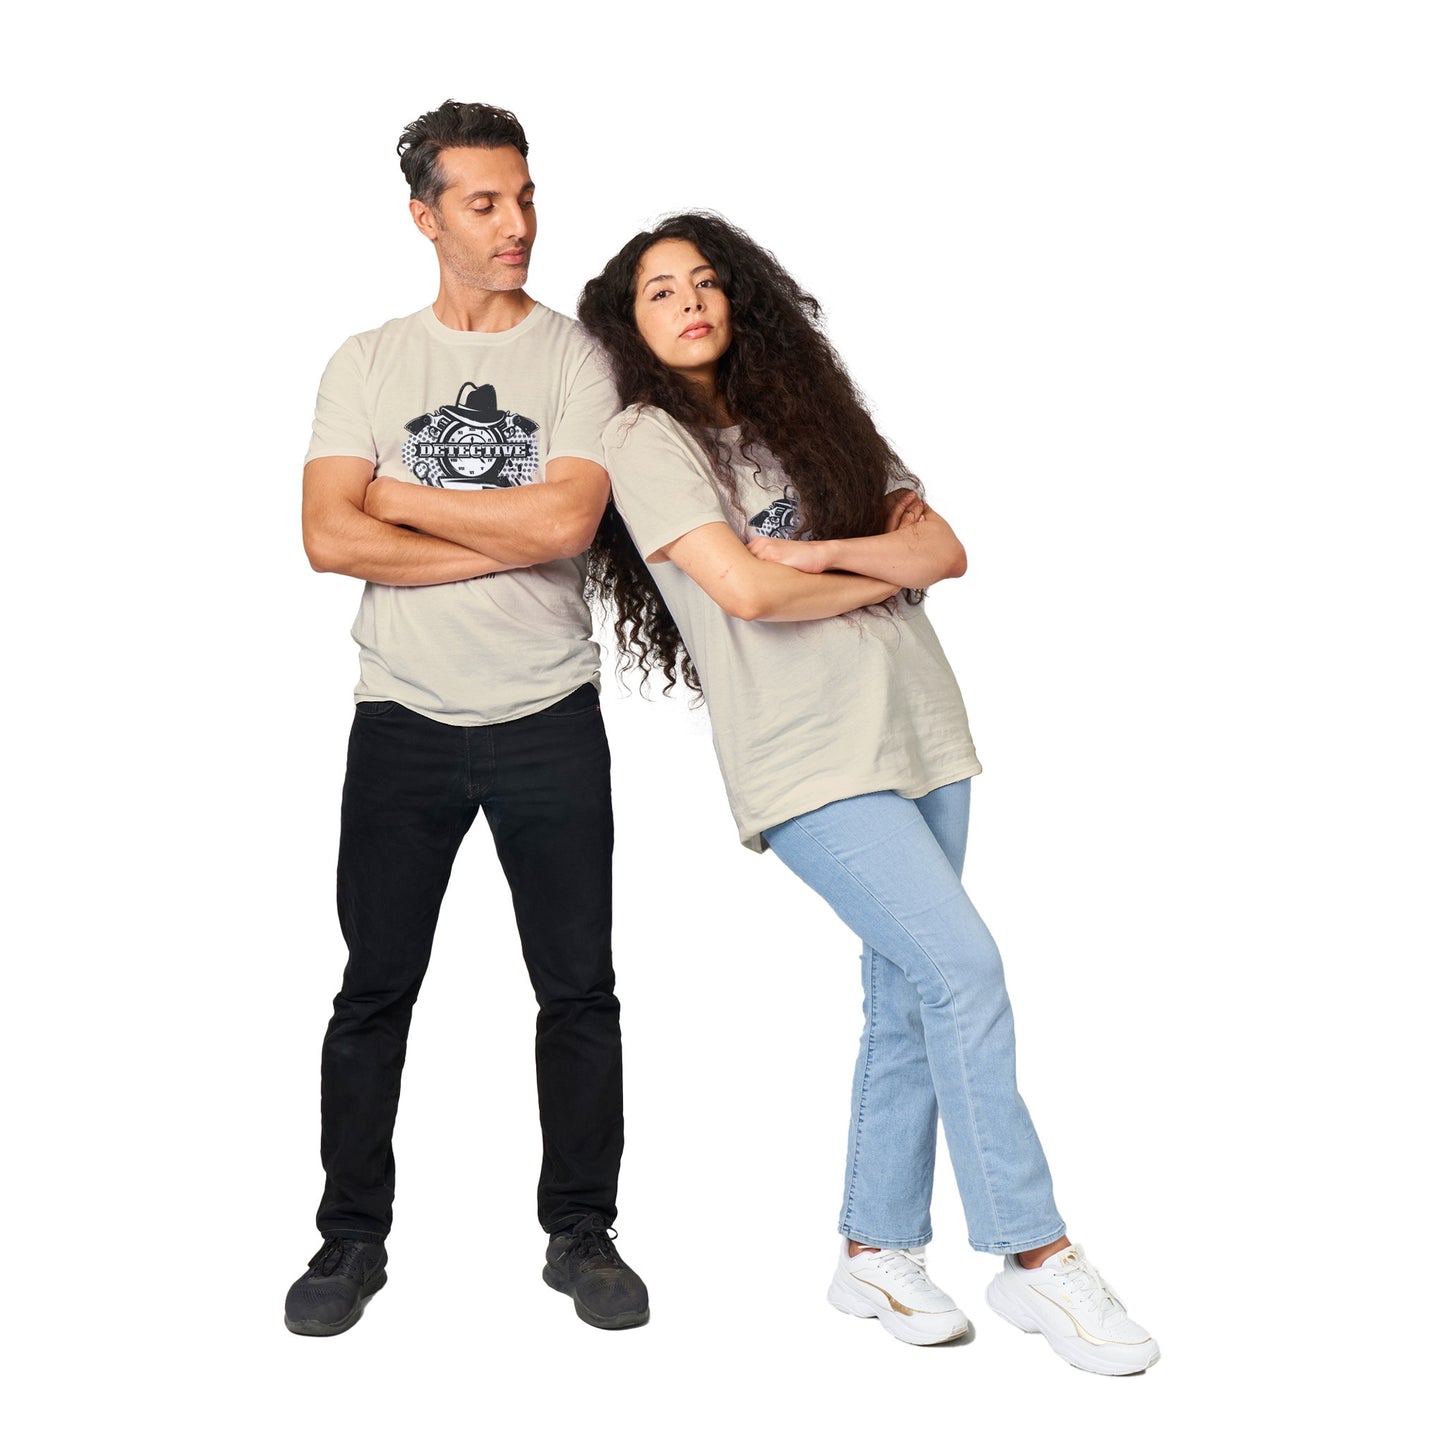 Short-Sleeve Unisex Crewneck T-shirt - National Private Investigator Day July 24th